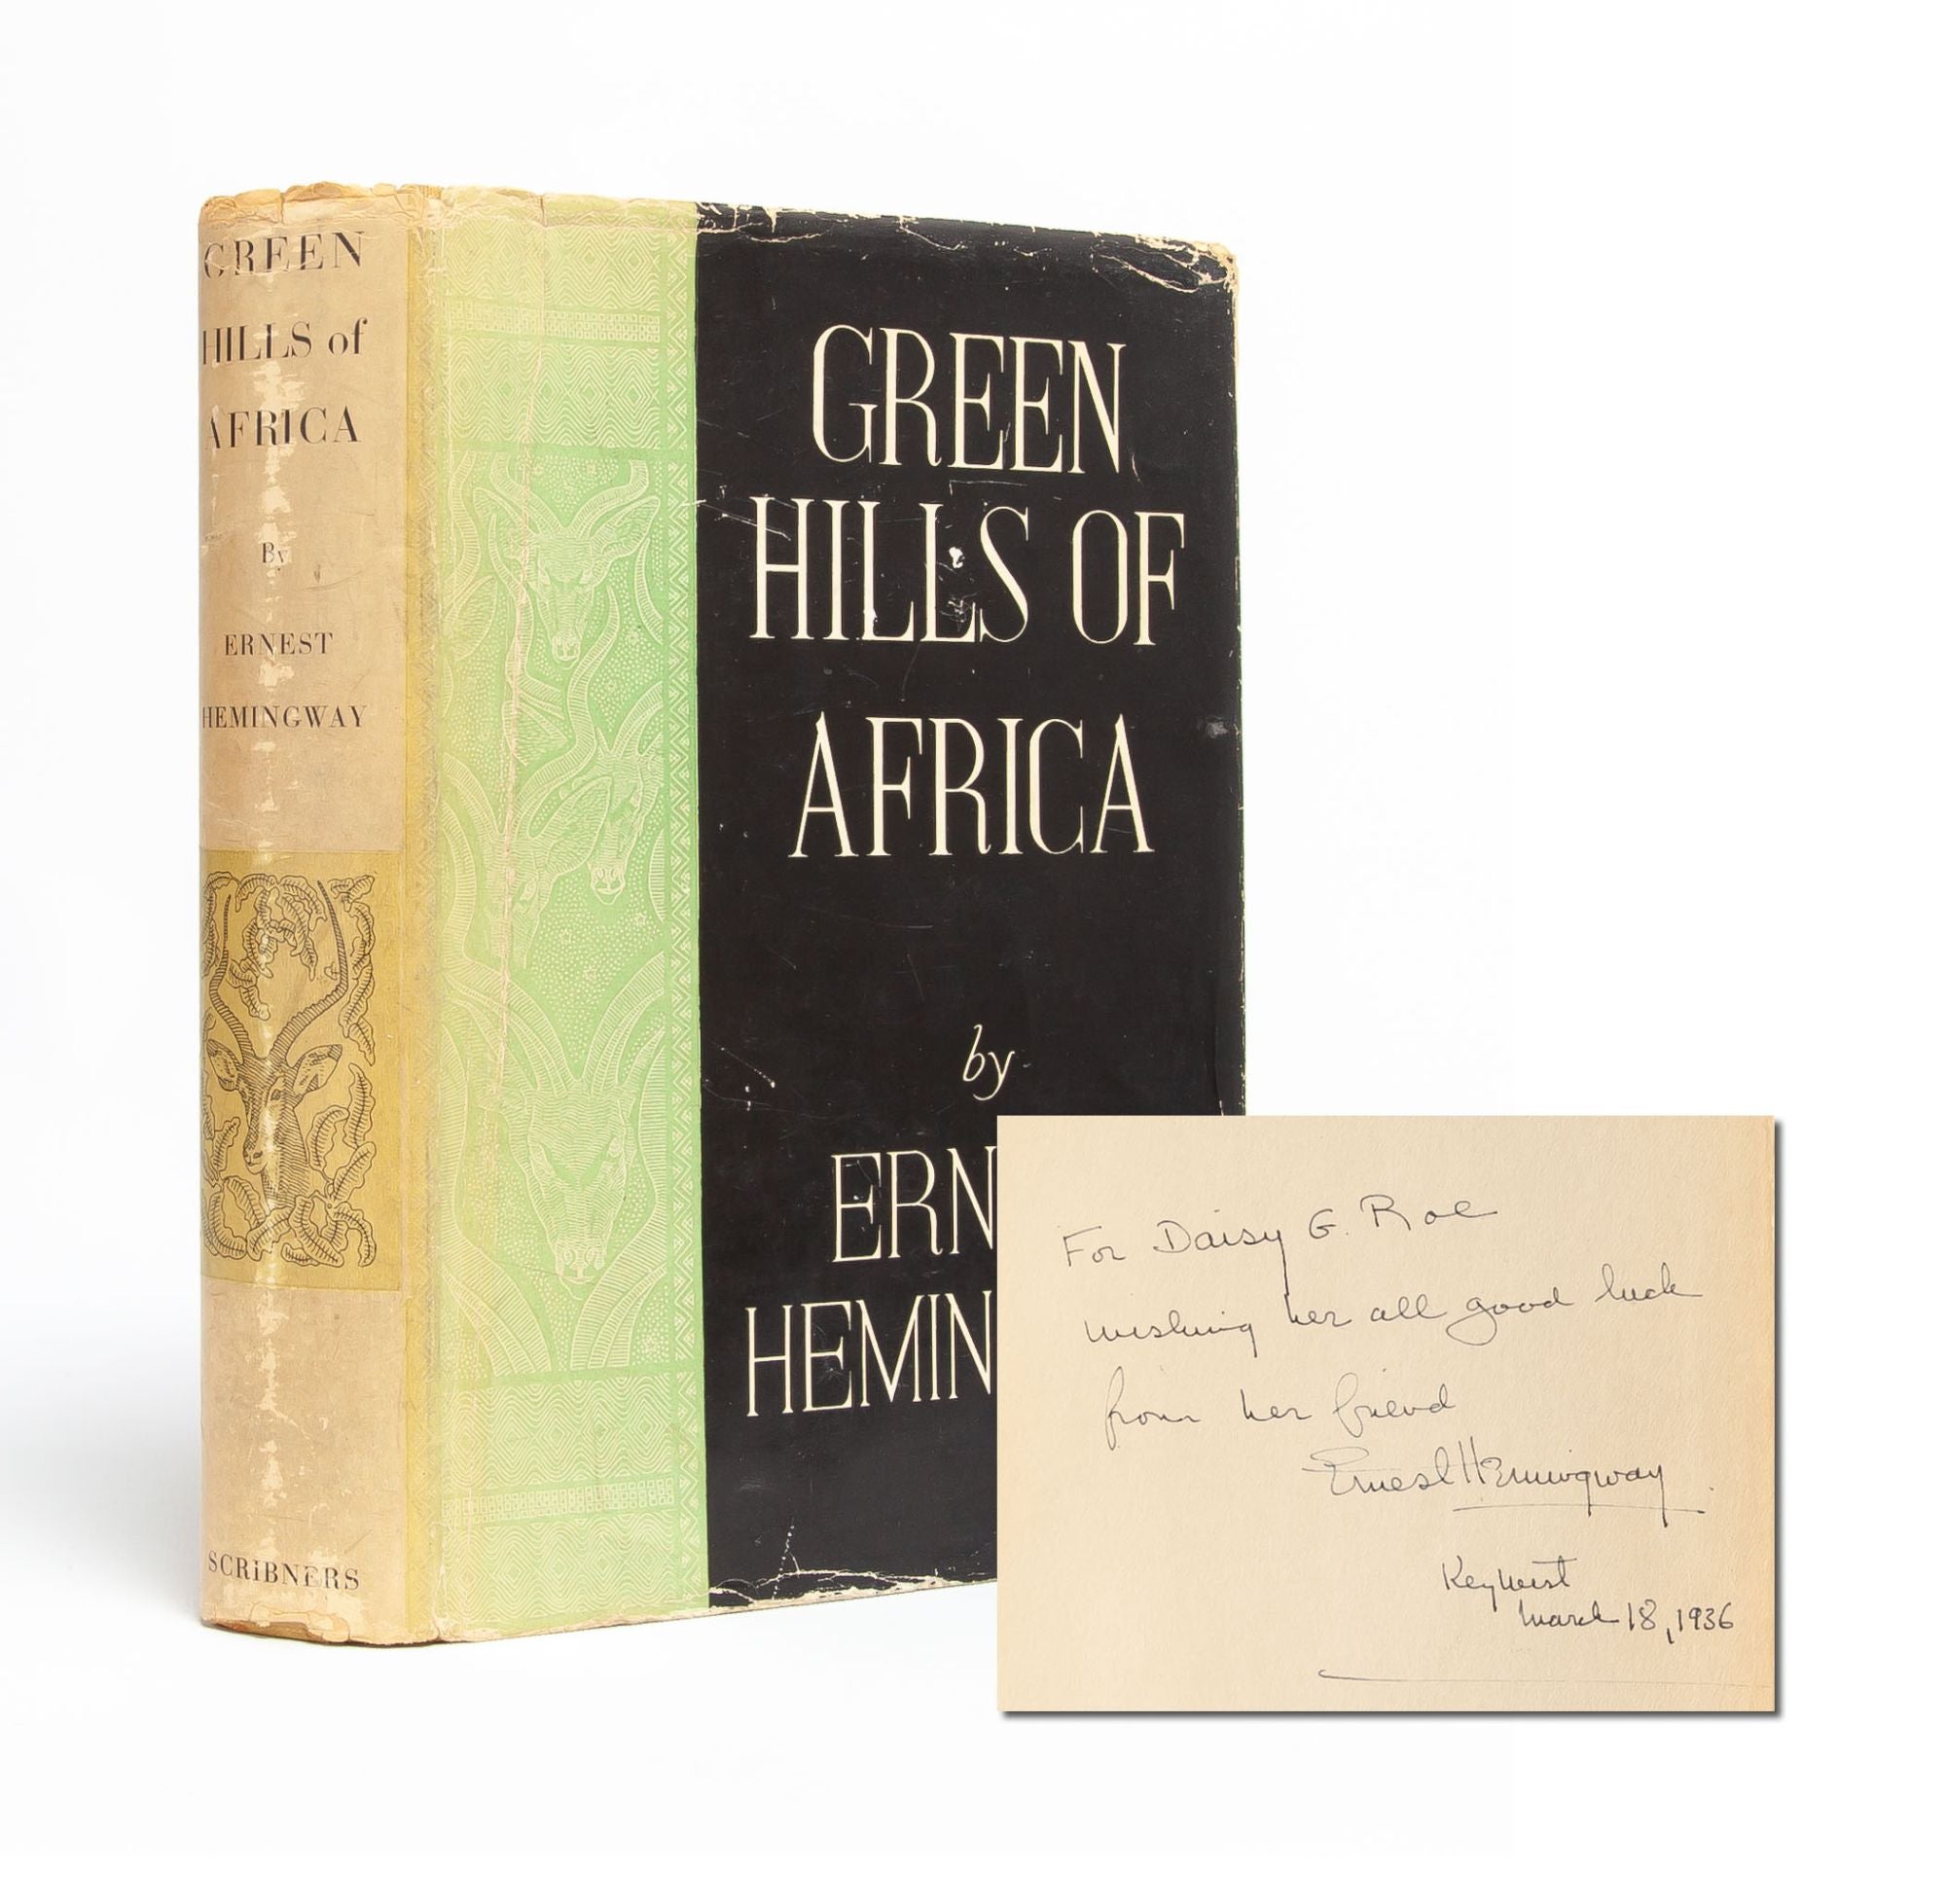 (Item #5255) Green Hills of Africa (Inscribed first edition). Ernest Hemingway.